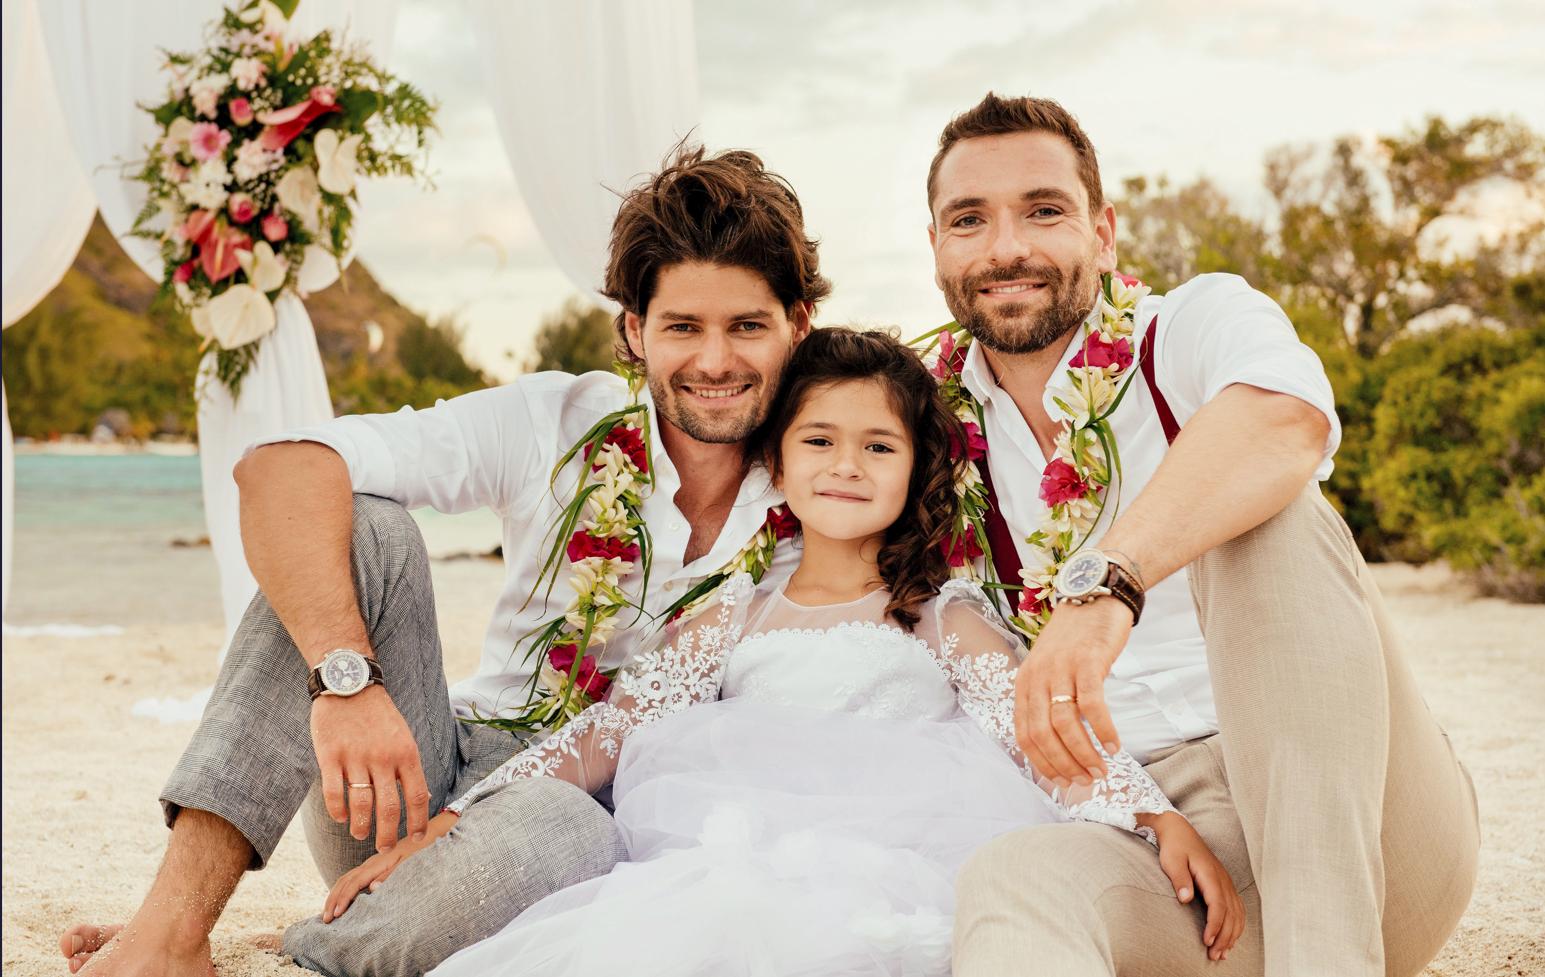 This studly two-Dad family is storming America pic